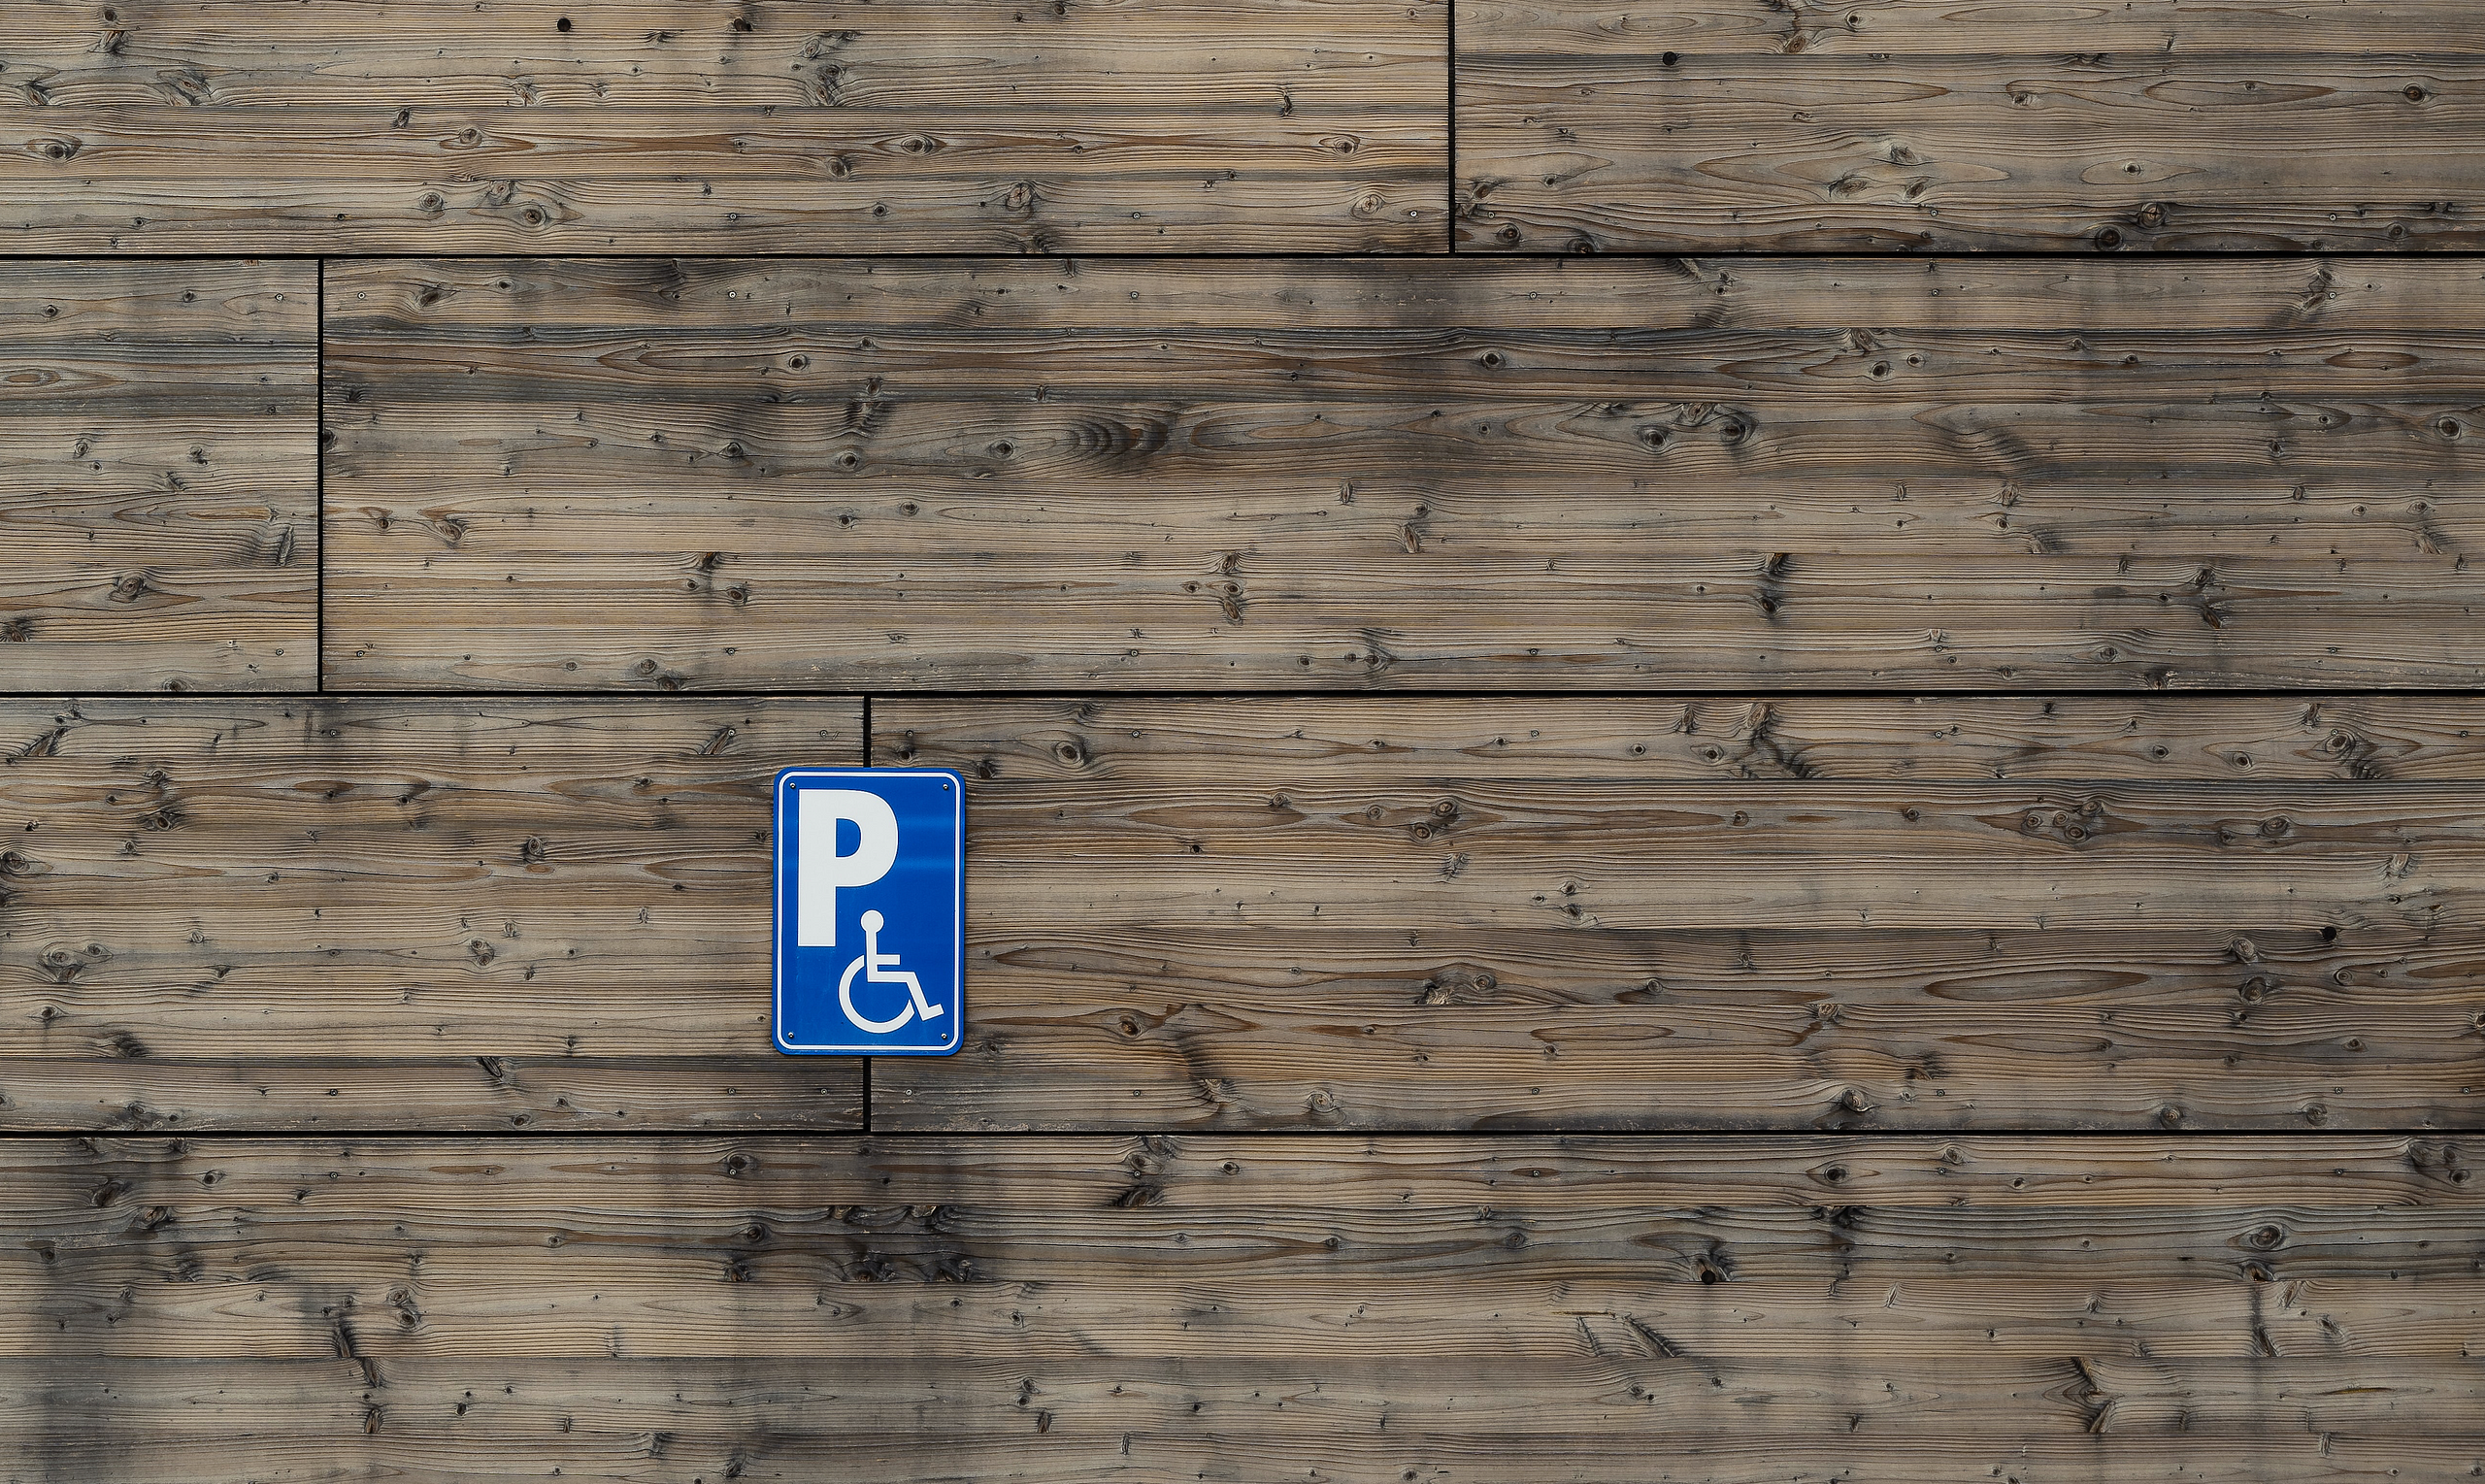 A decorative image for this article showing a disability-parking sign stuck on a wood/timber wall.